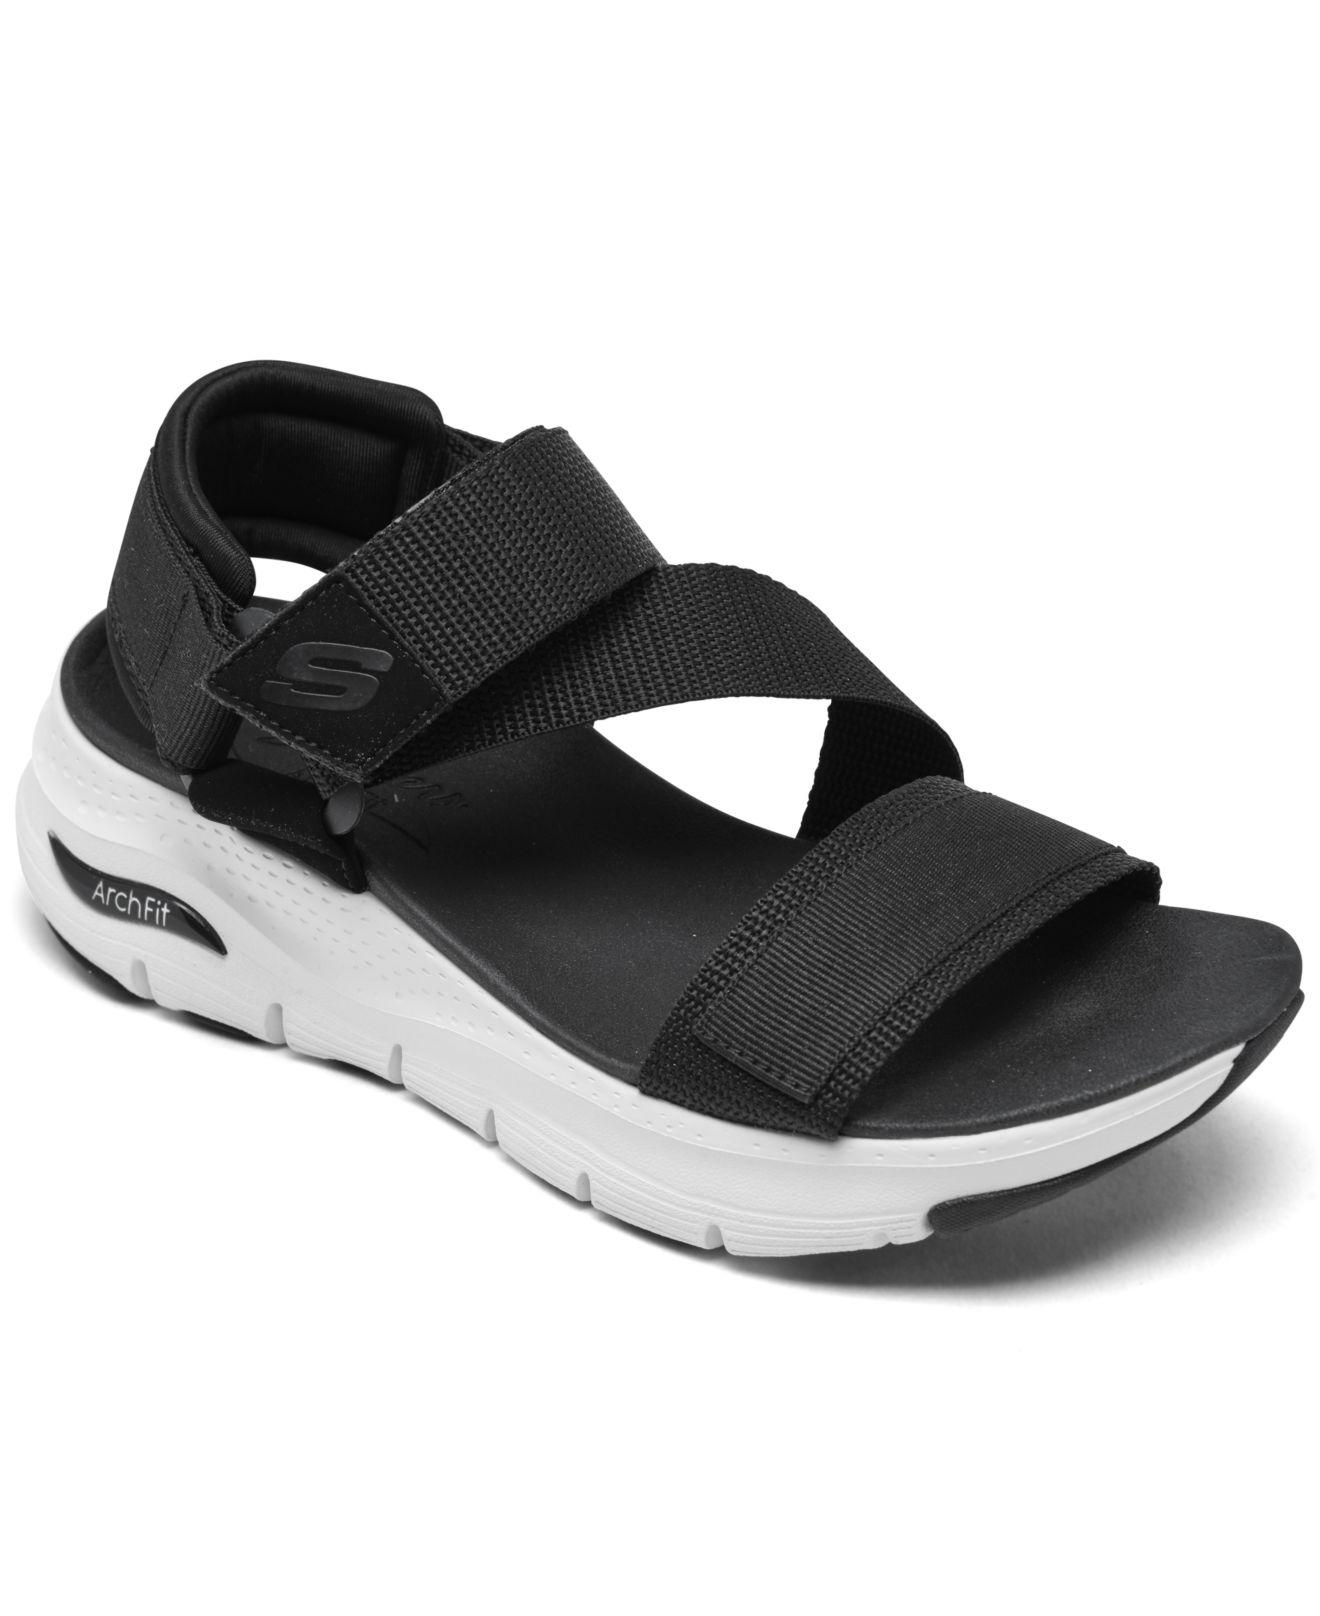 Skechers Arch Fit Arch Support - Casual Retro Walking Sandals From ...